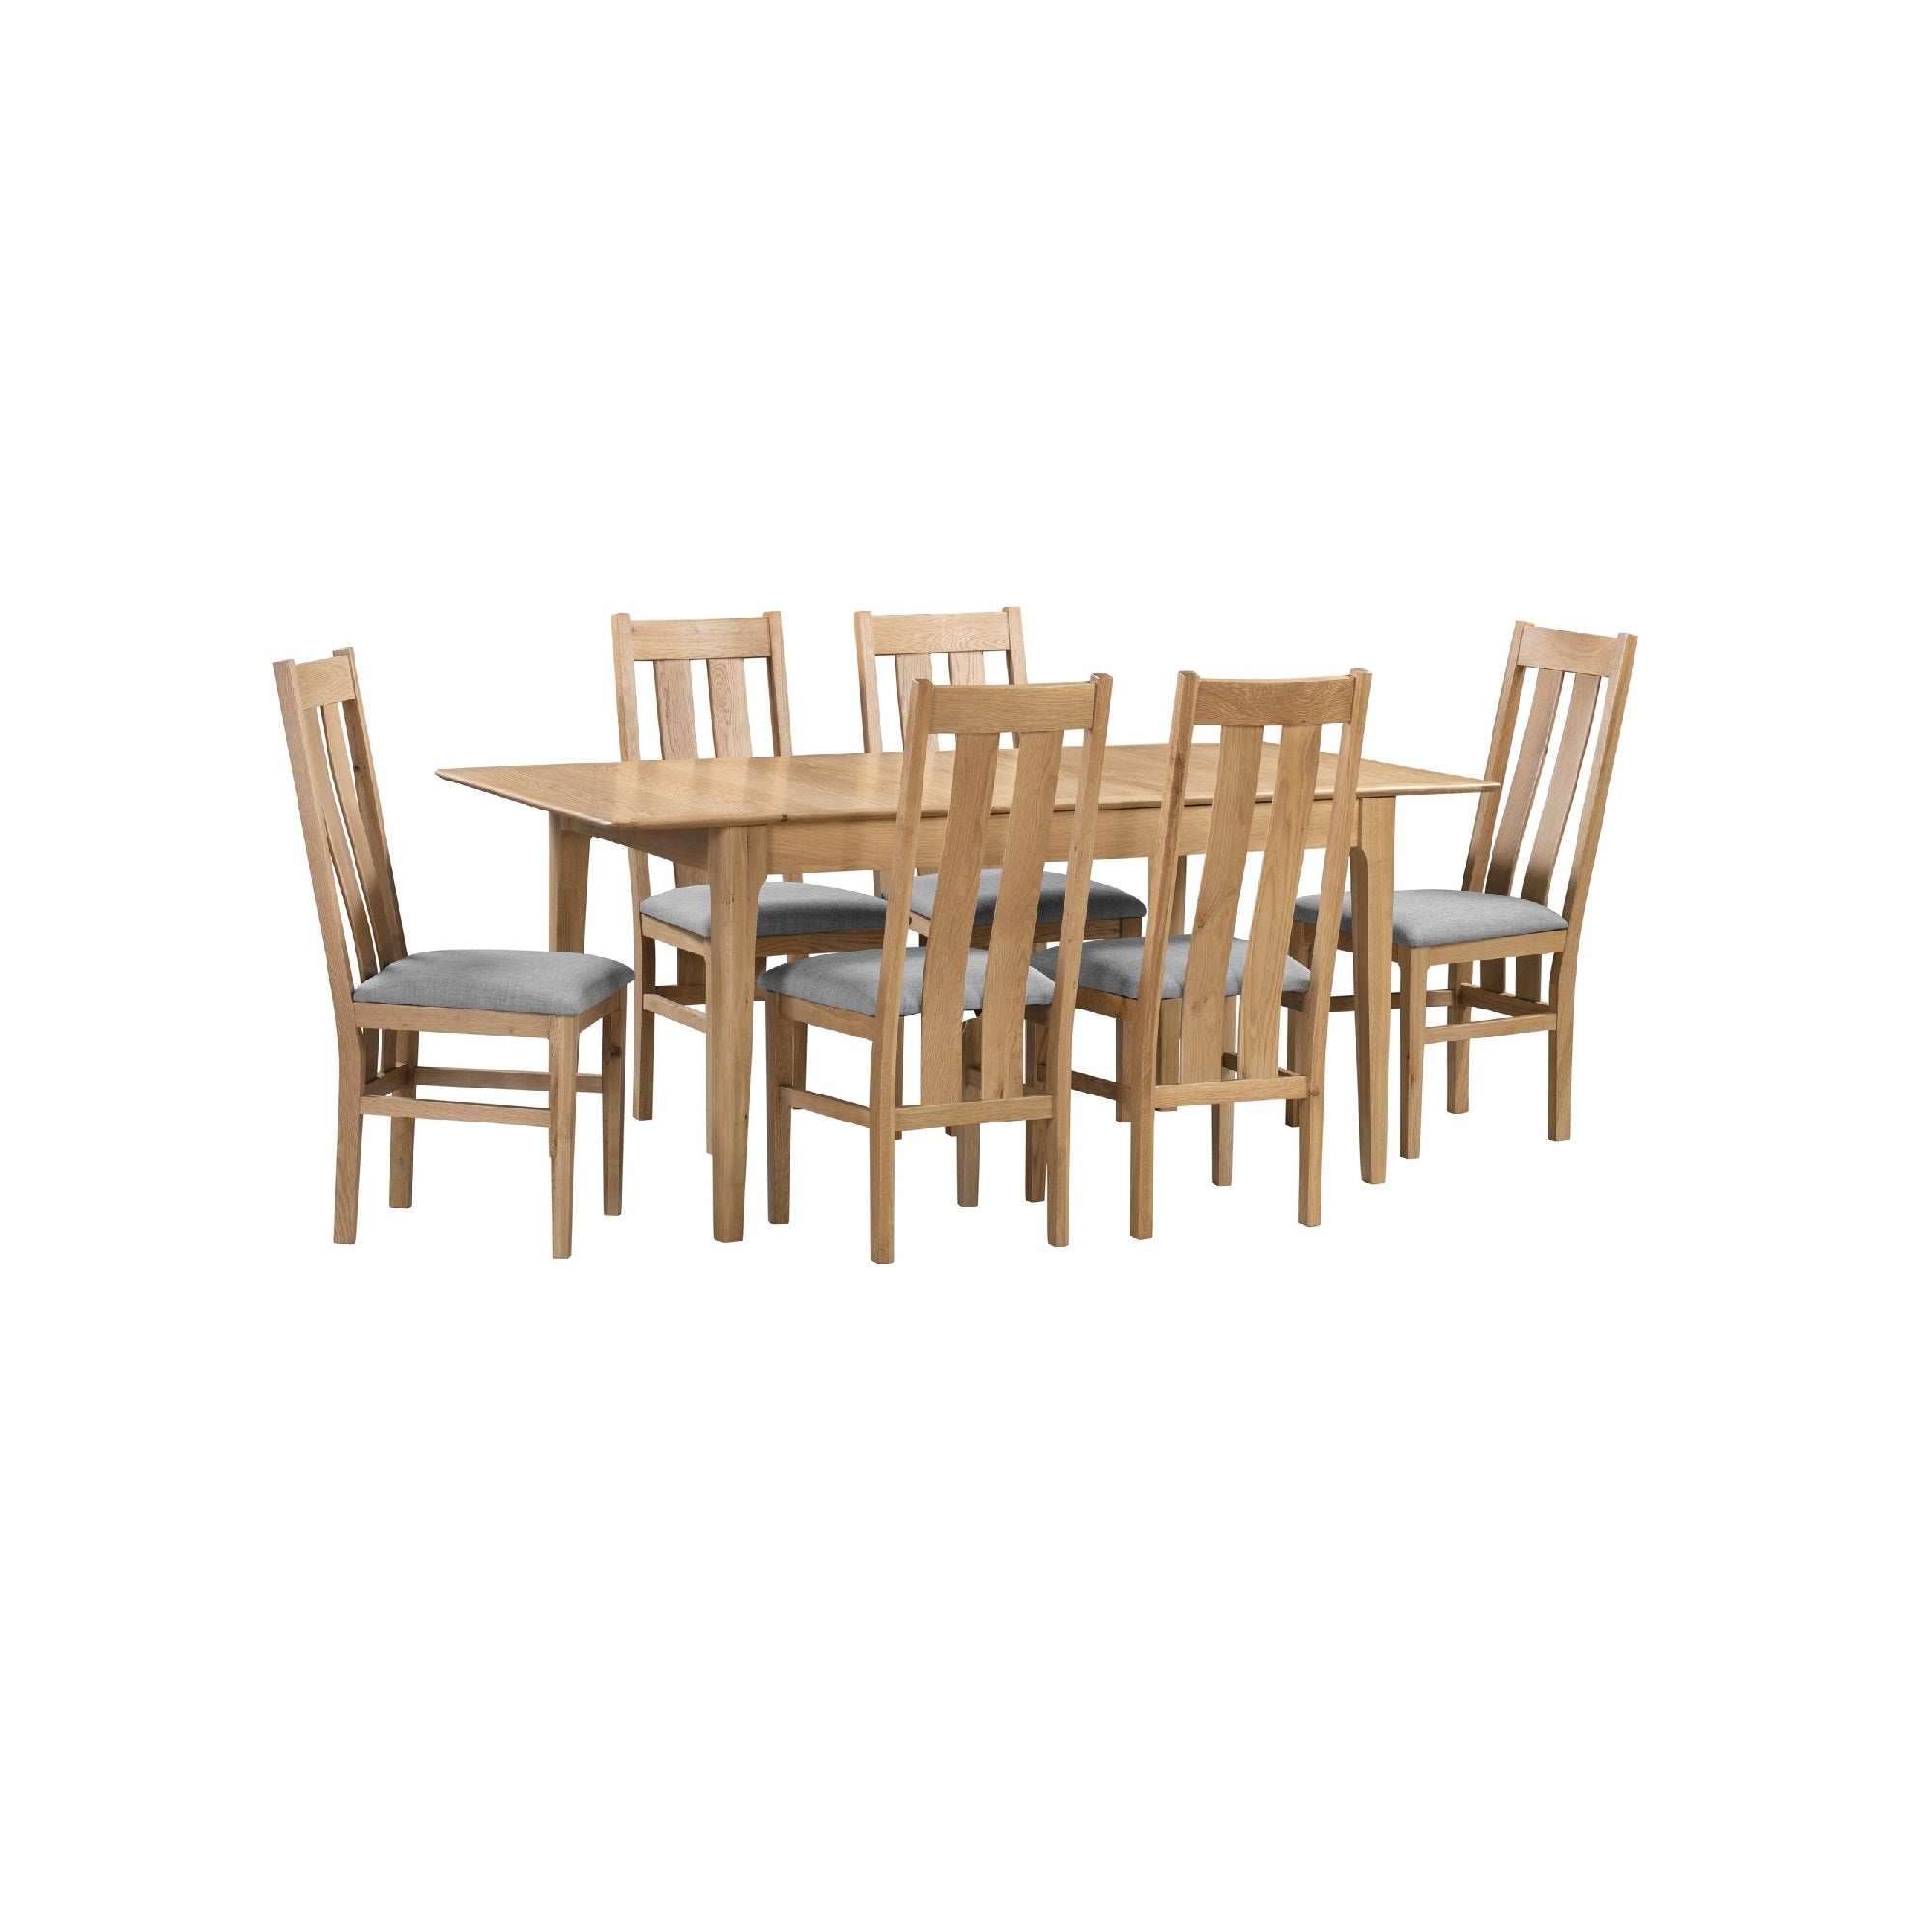 Cotswold Rectangular Extendable Dining Table With 6 Chairs Solid Oak Oak